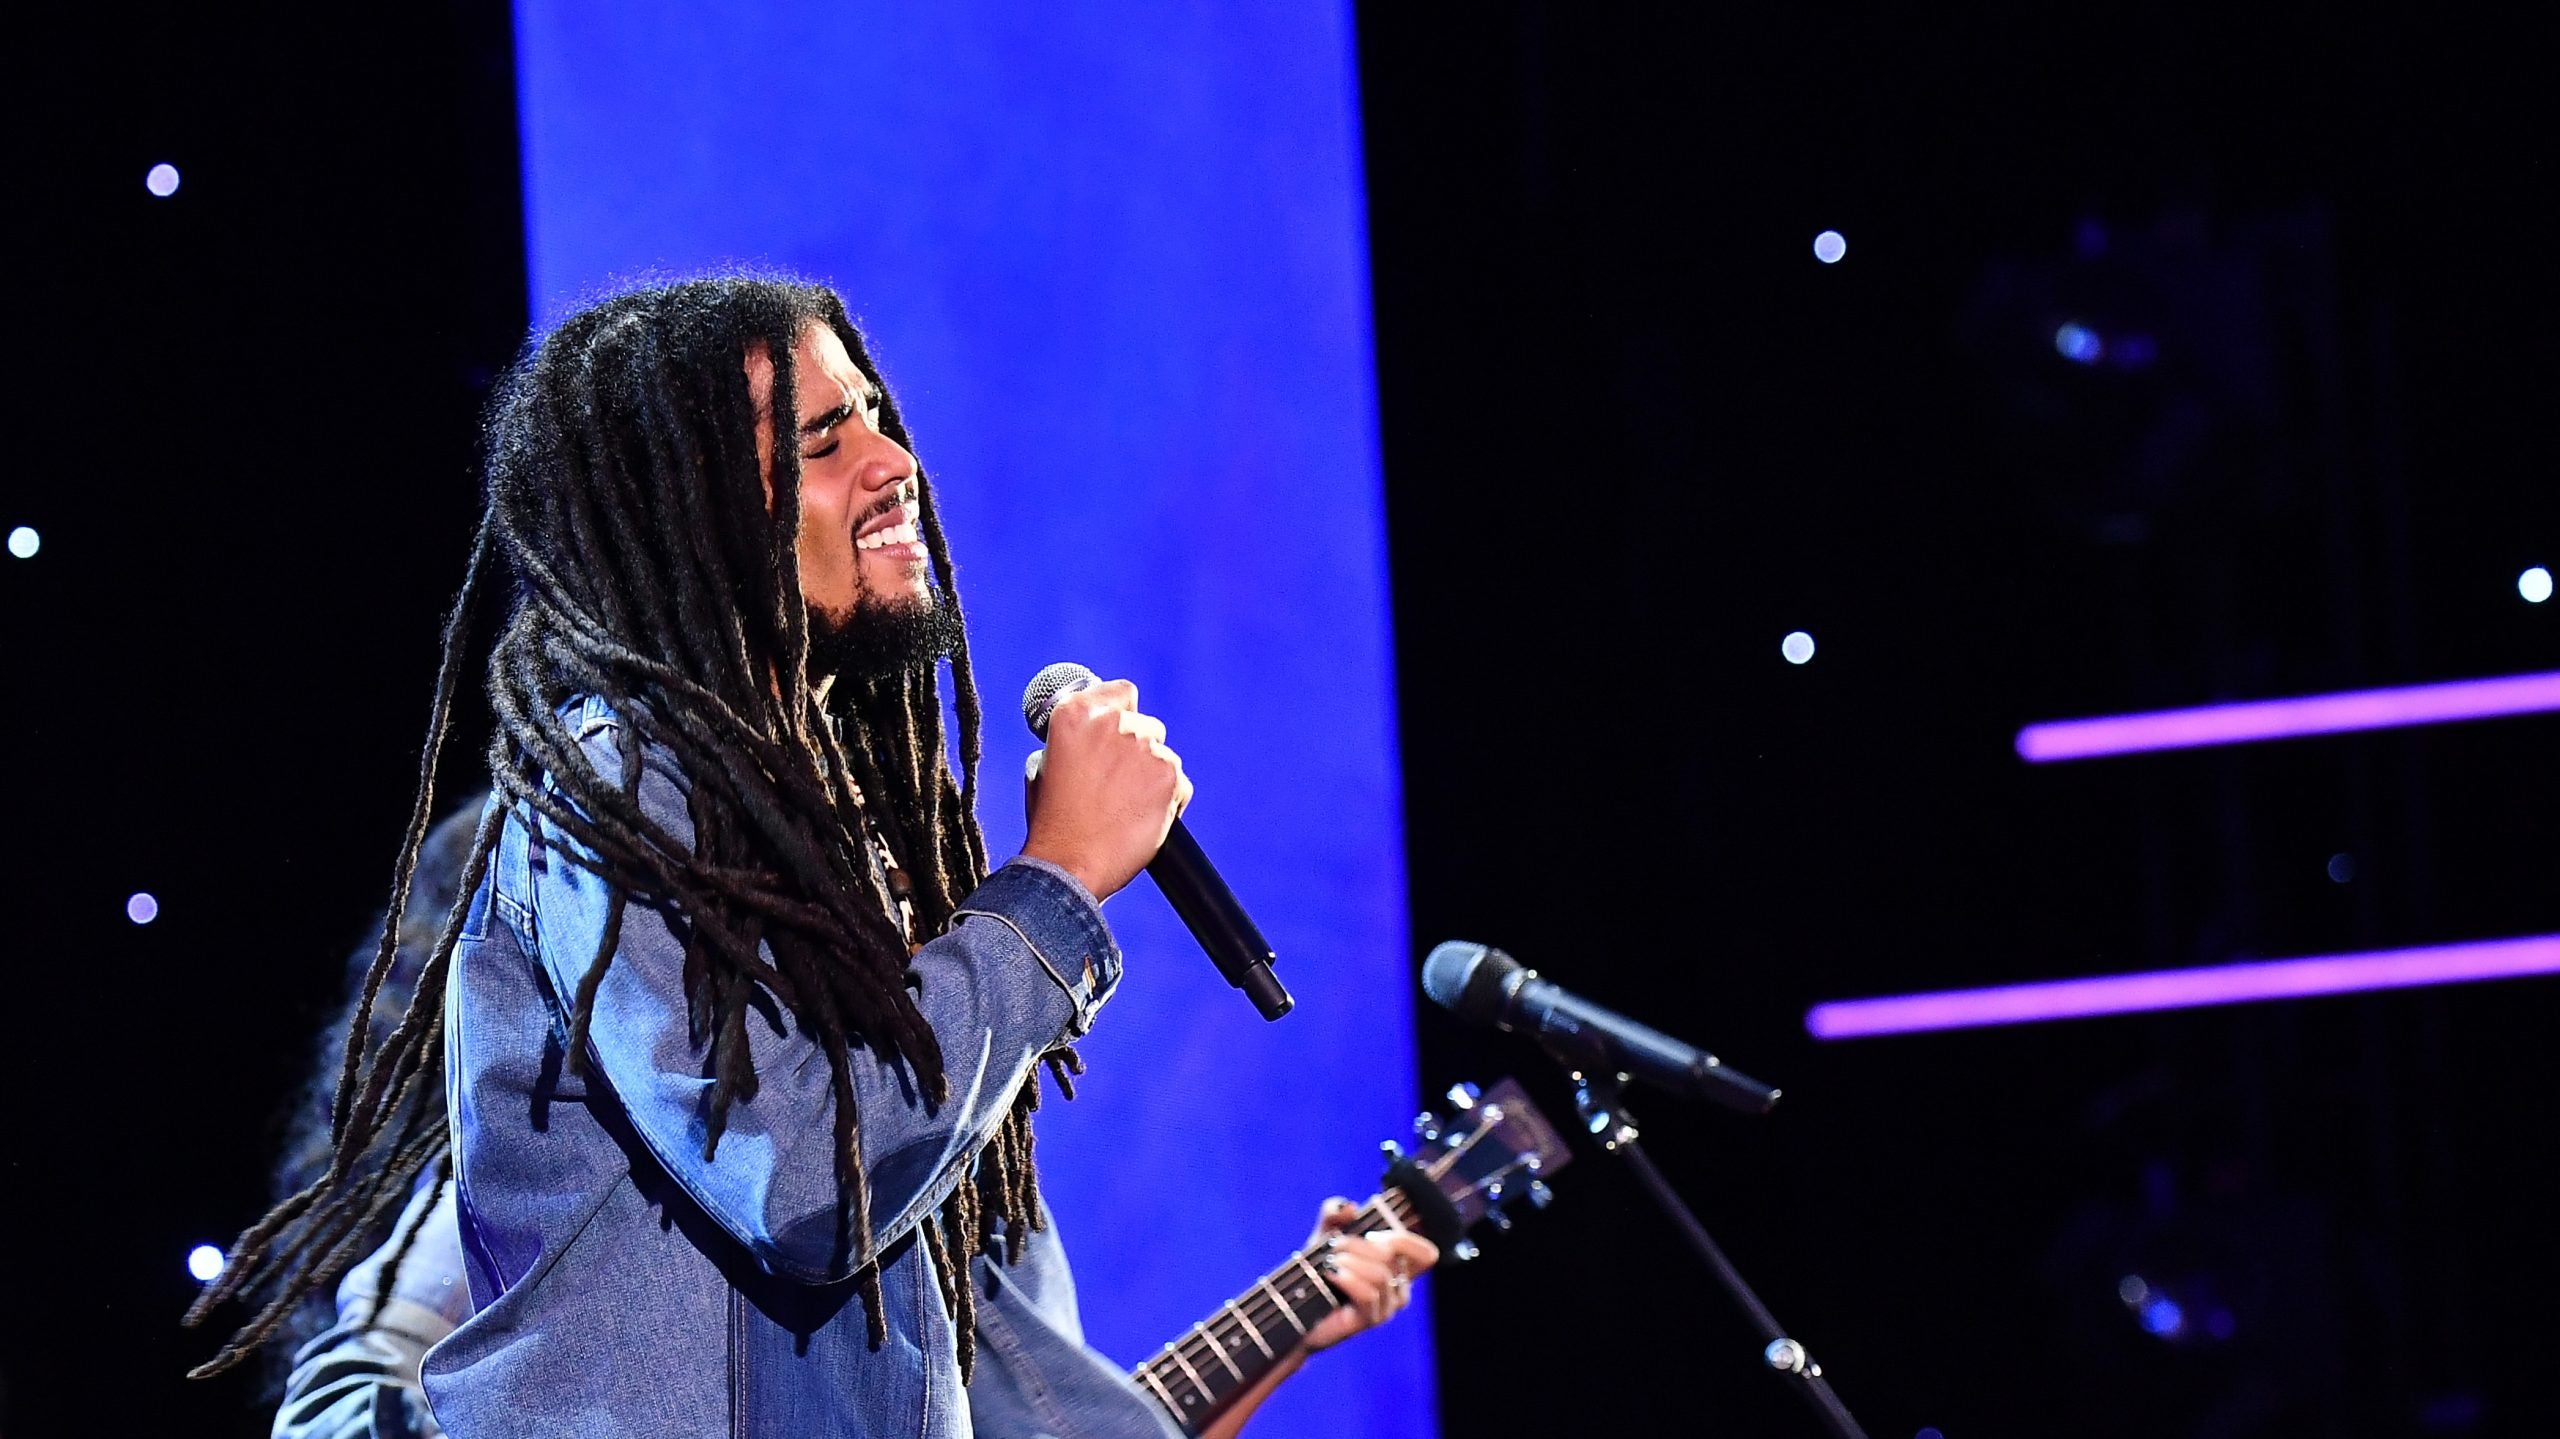 Skip Marley Makes Music History With 'Slow Down'